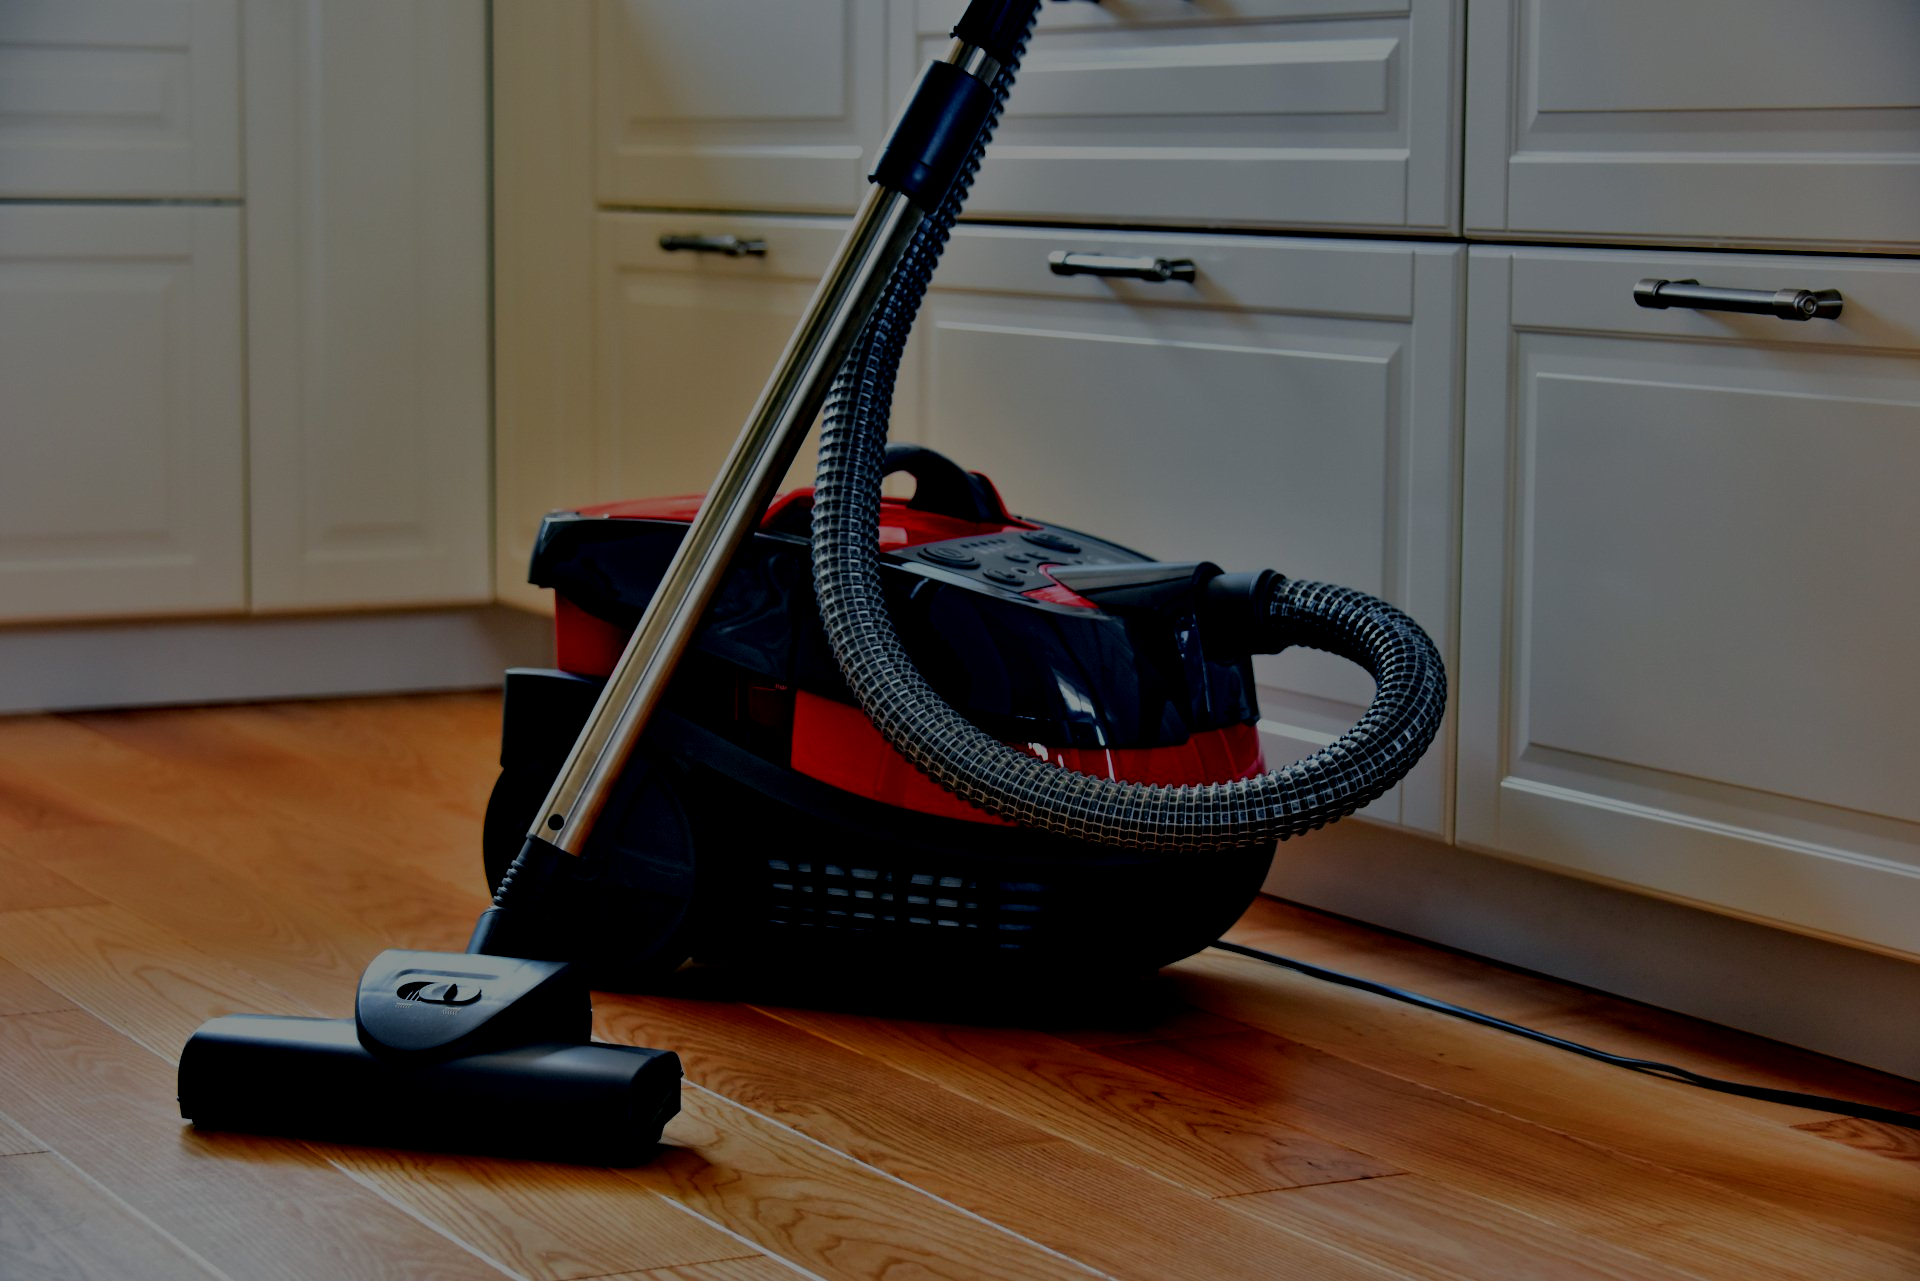 Becoming a Vacuum Cleaner: A Guide to Cleaning Your Vacuum